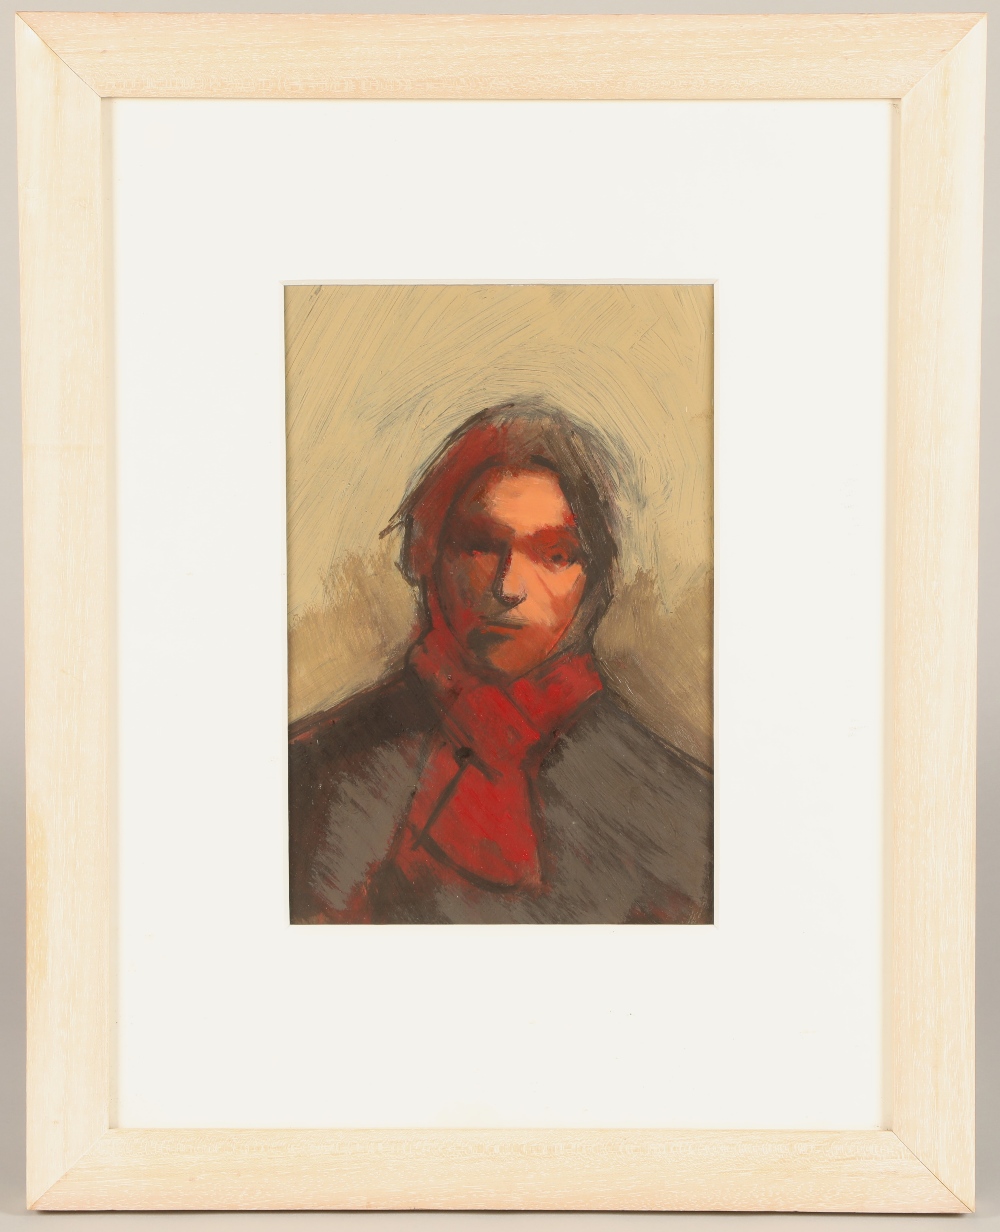 Anthony Scullion RGI (Scottish born 1967) ARR framed mixed media on paper, "Red Scarf",30cm x 20 cm. - Image 2 of 3